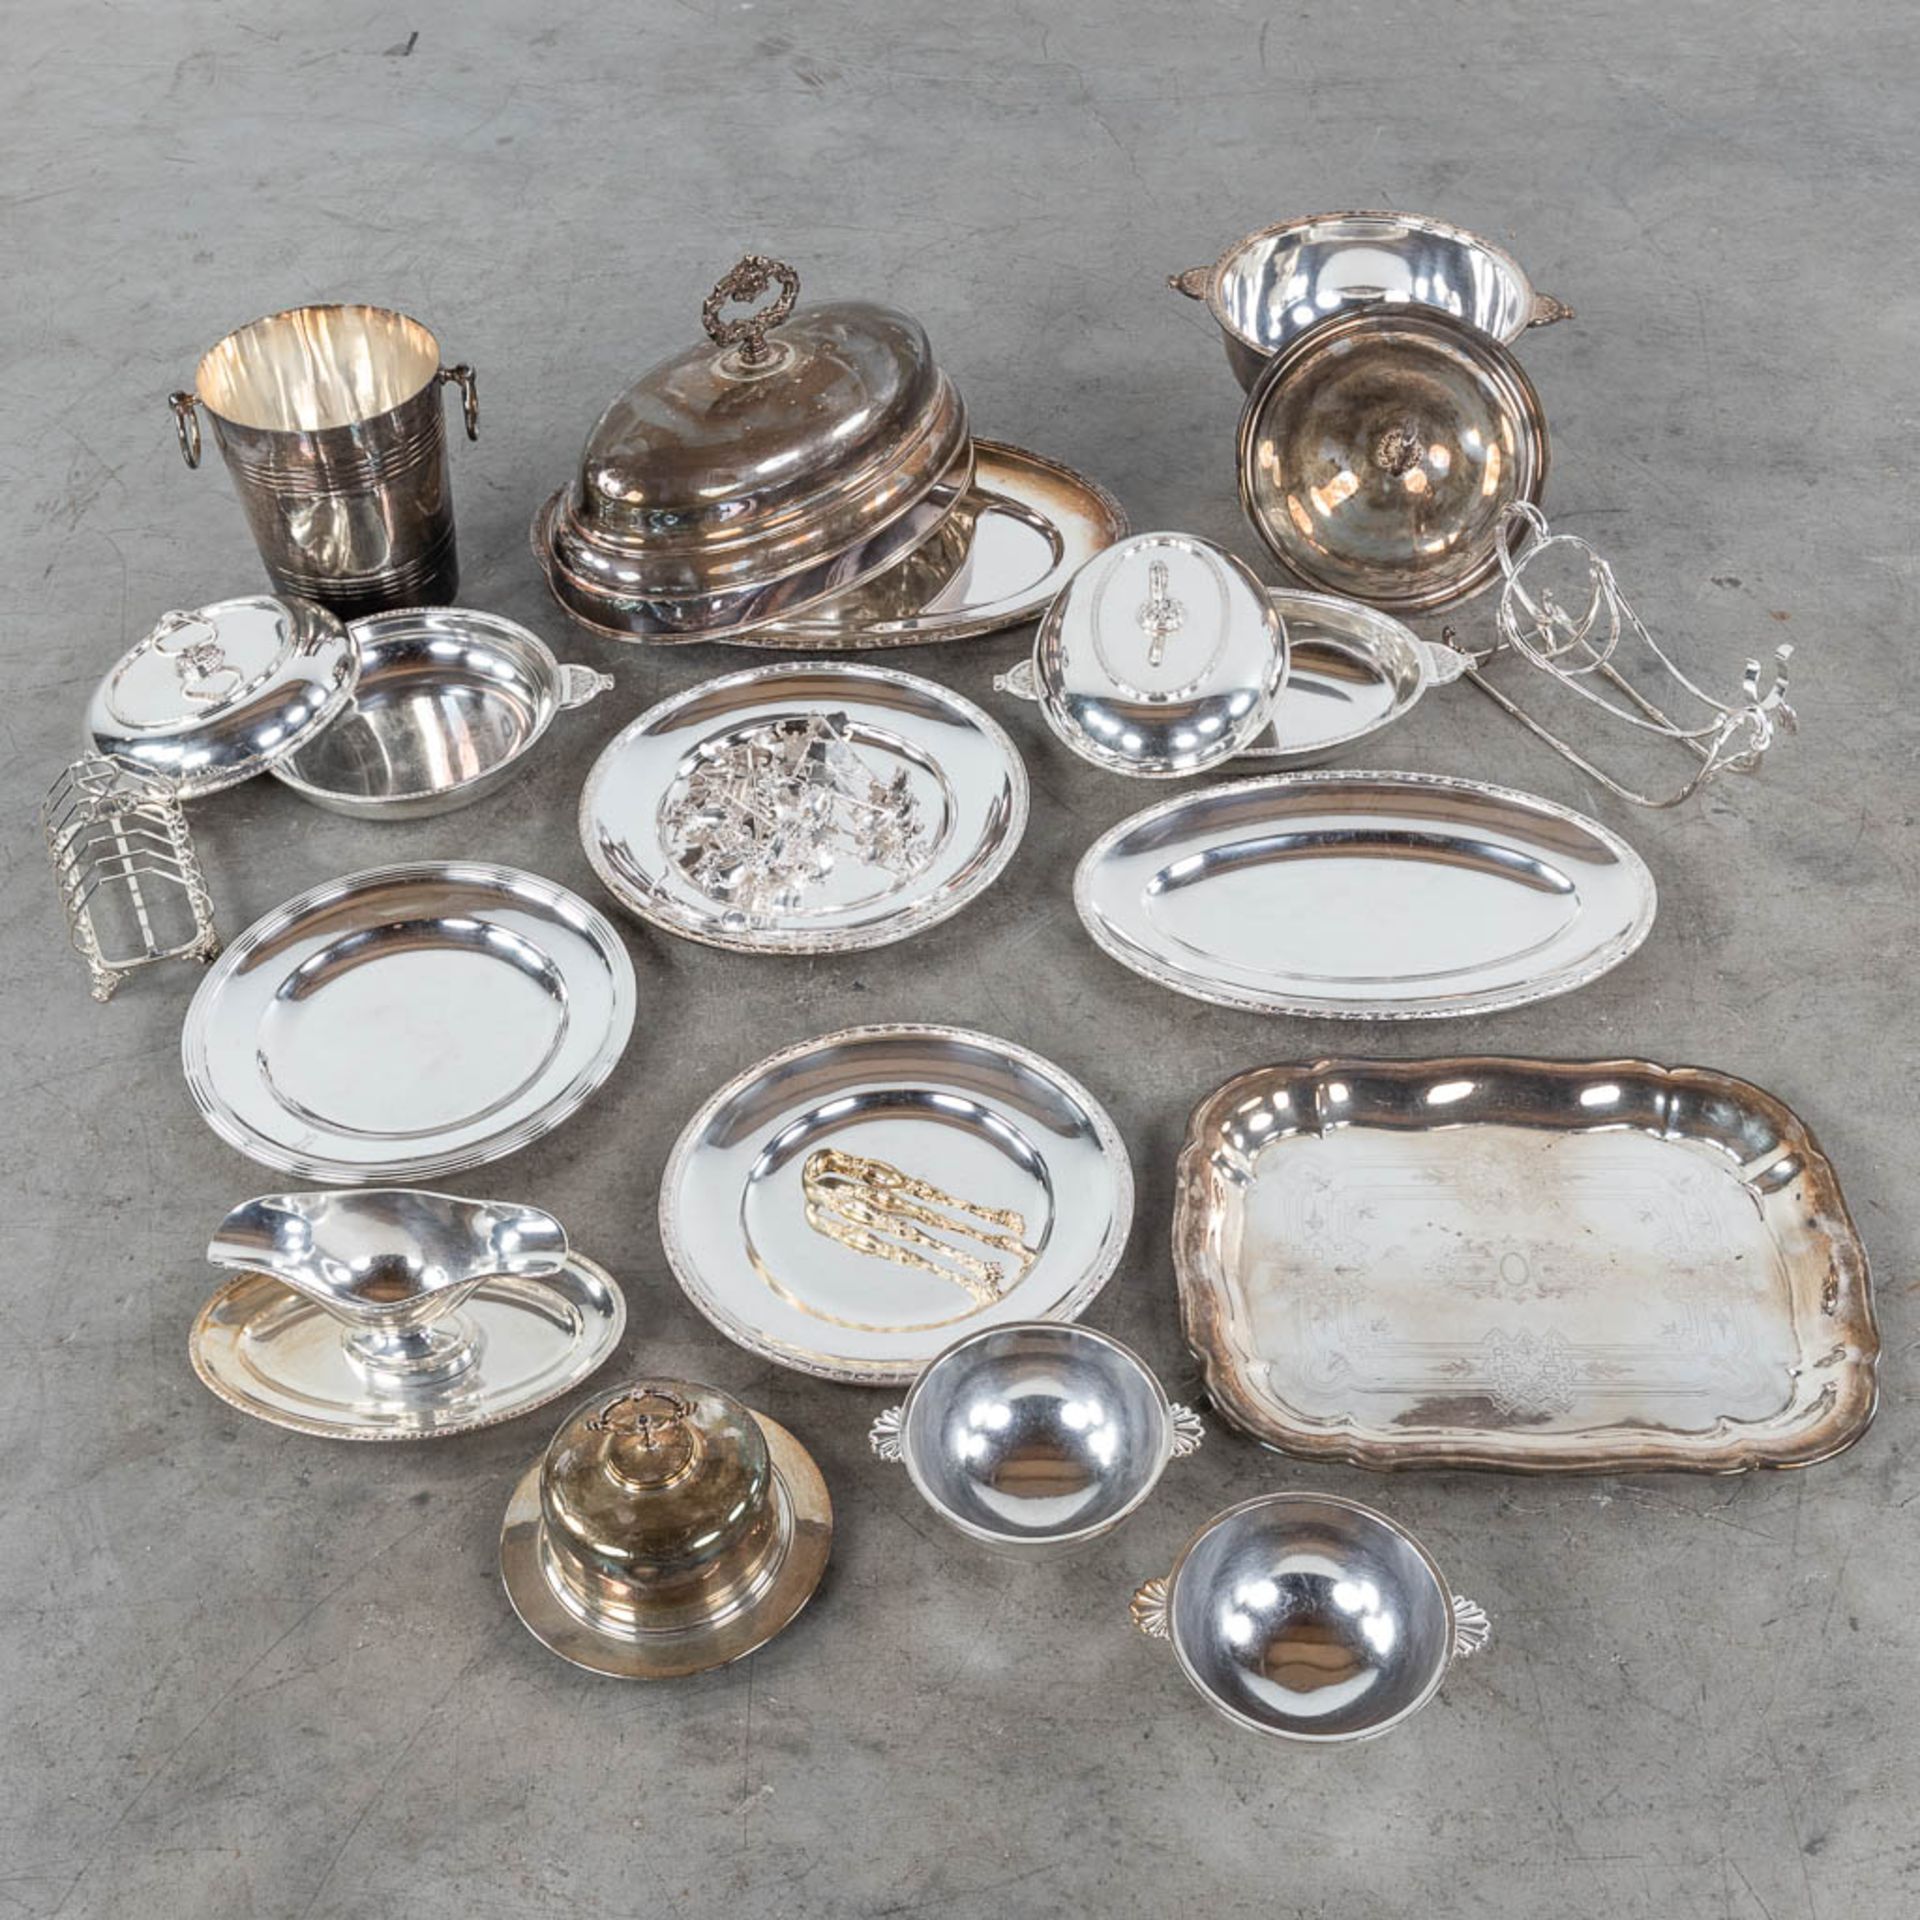 A large collection of table accessories and serving ware, silver-plated metal. (L: 32 x W: 48 cm) - Image 3 of 10